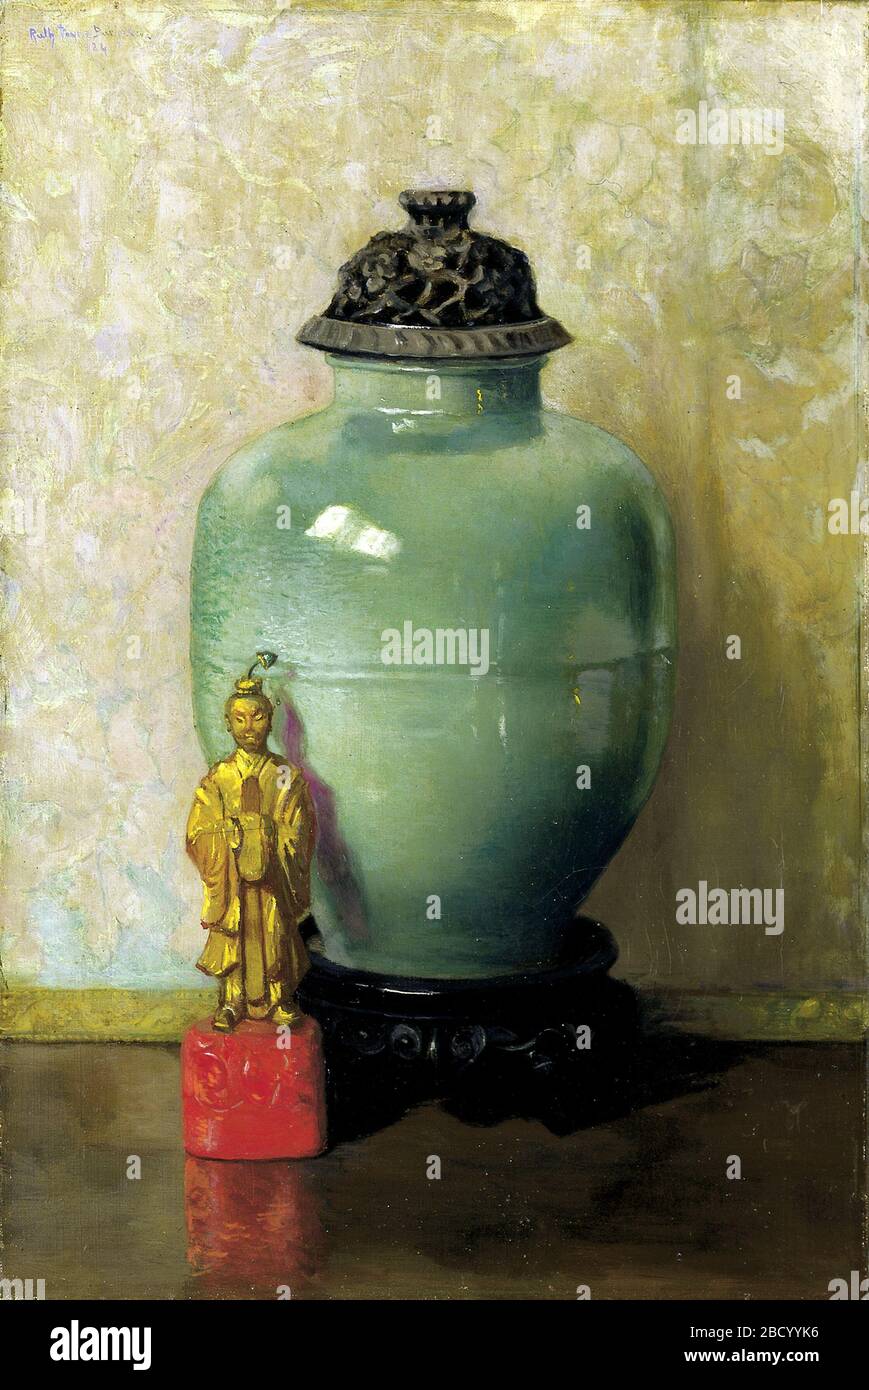 Green Chinese Jar. This painting shows a large pale green urn and a small figure of a Chinese scholar. After the fall of the Qing, China’s last imperial dynasty, hundreds of thousands of porcelains, paintings, and sculptures made their way out of China and into Western hands. Stock Photo